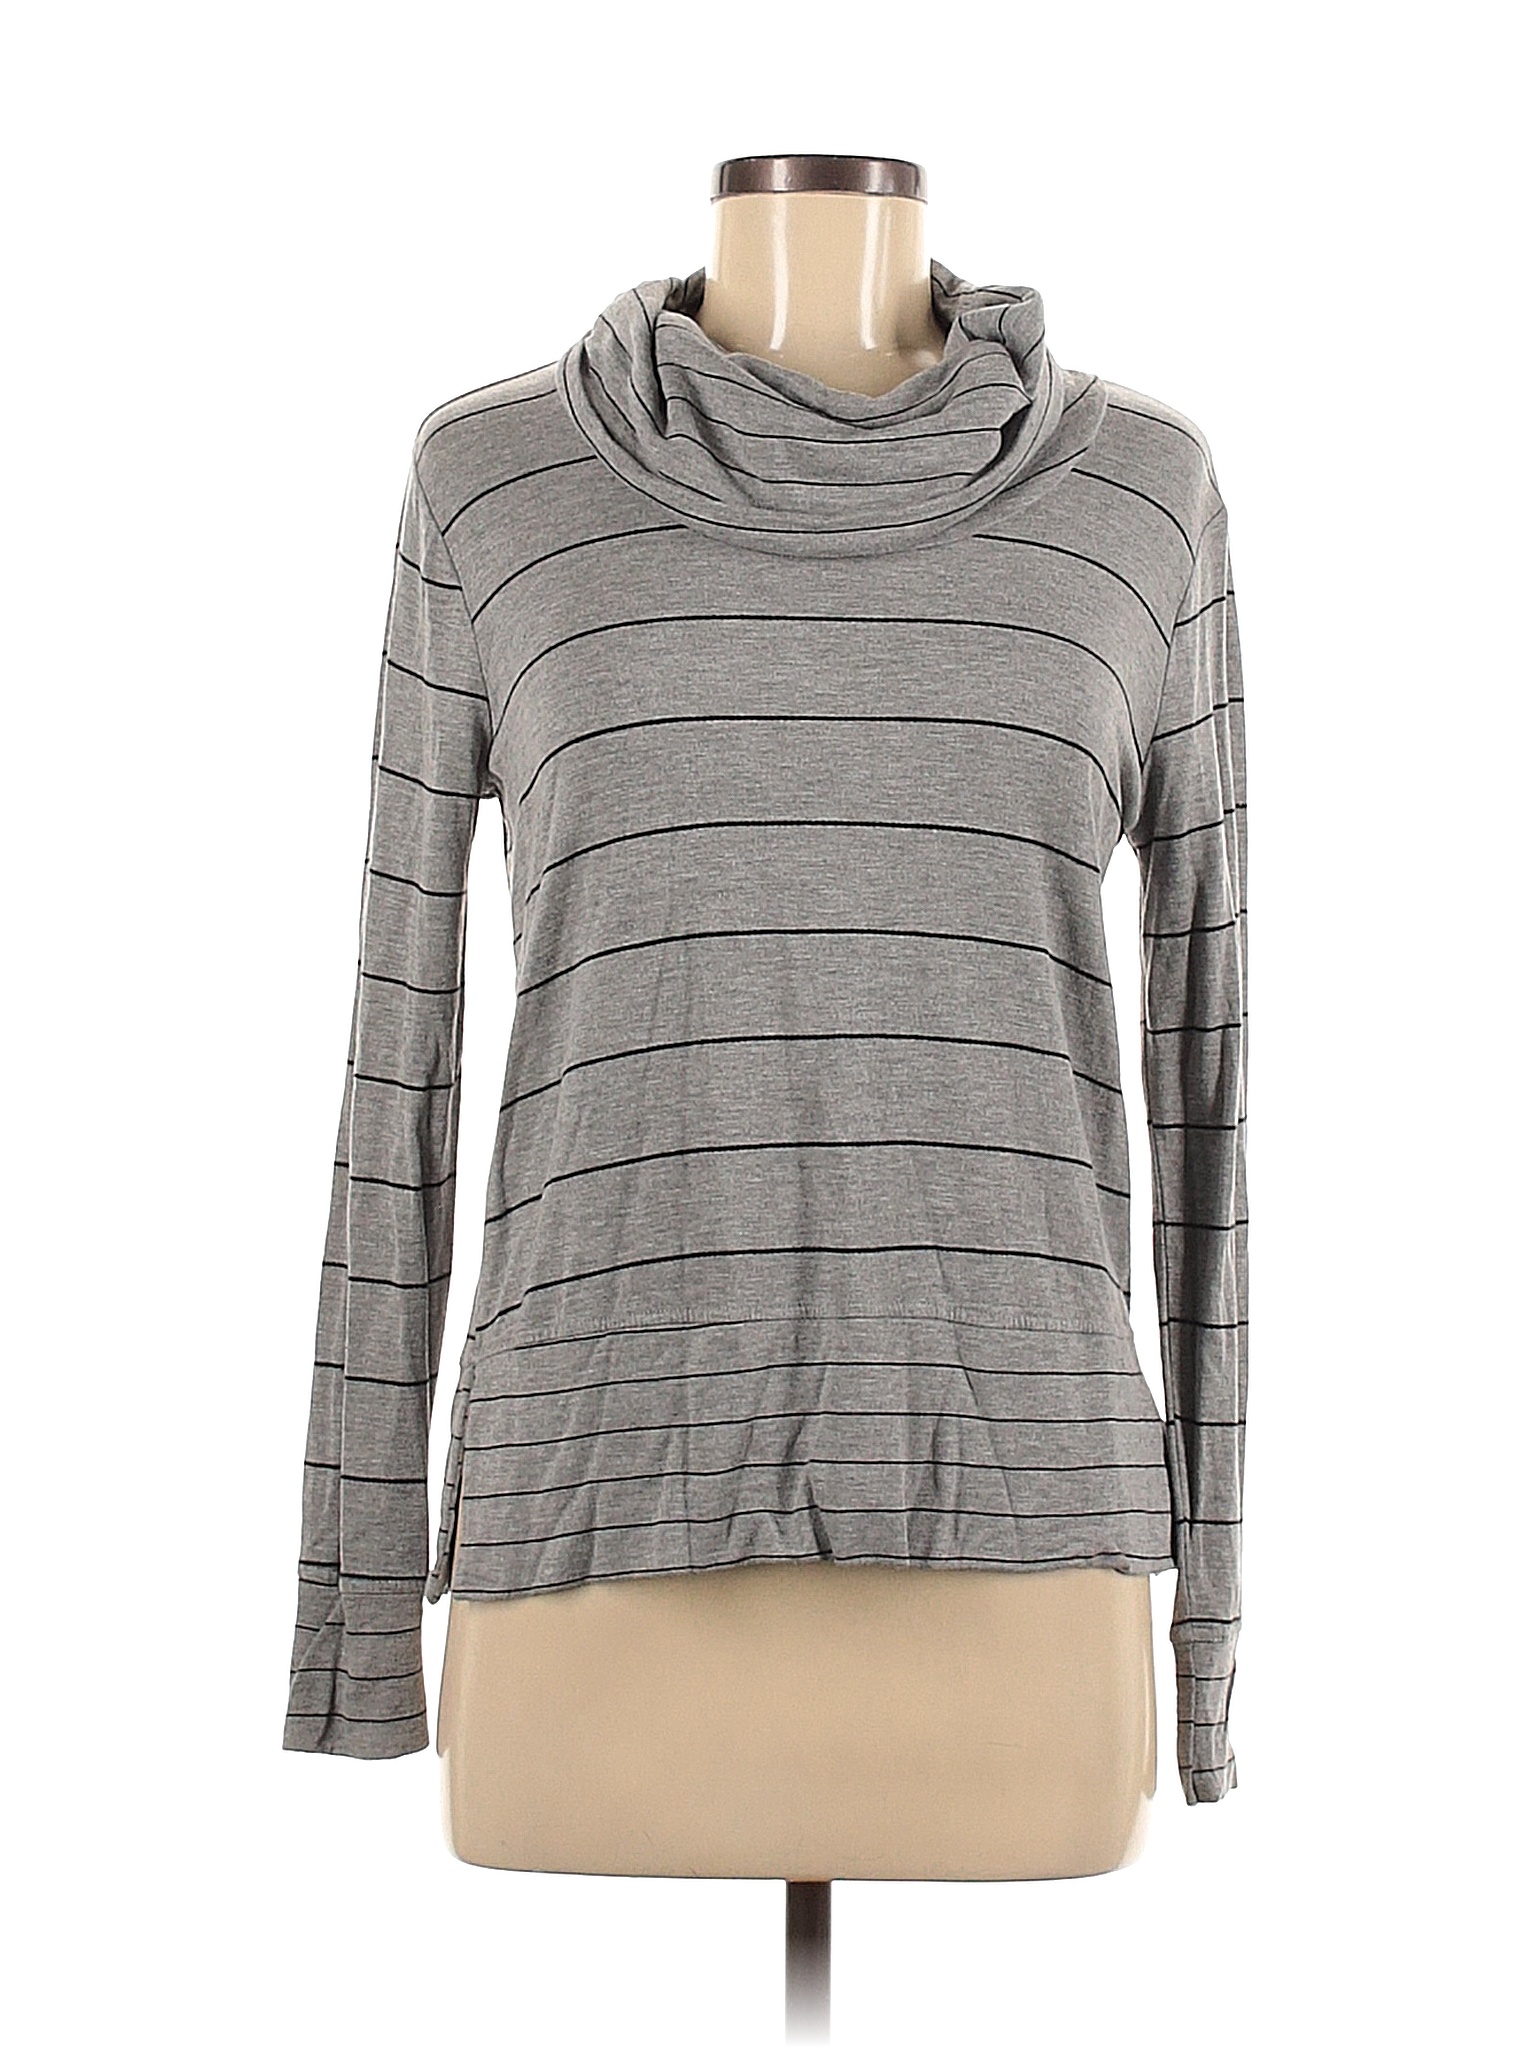 Cable & Gauge Stripes Gray Long Sleeve Top Size M - 74% off | thredUP